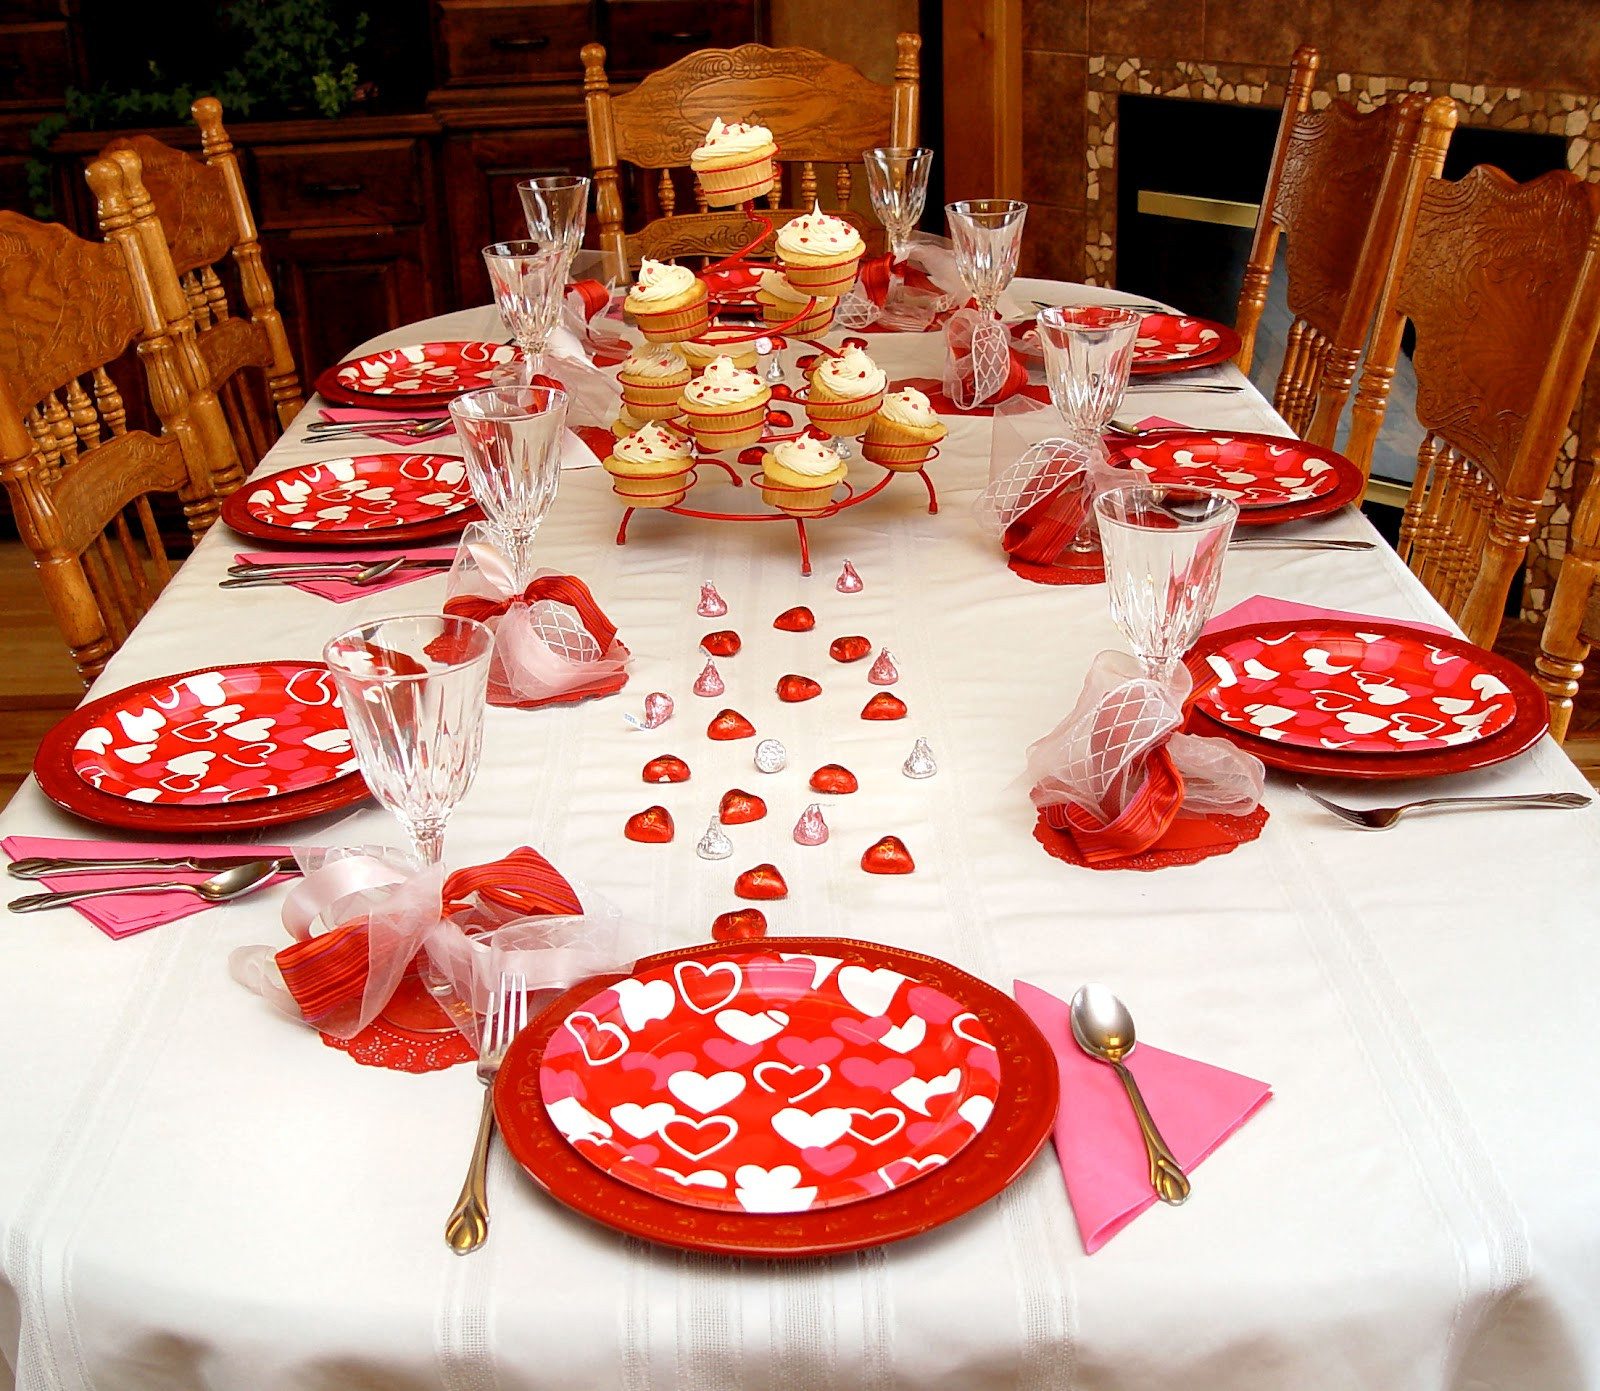 Valentine Dinner For Family
 Family Valentines Dinner Idea and How To Make A Junk Bow